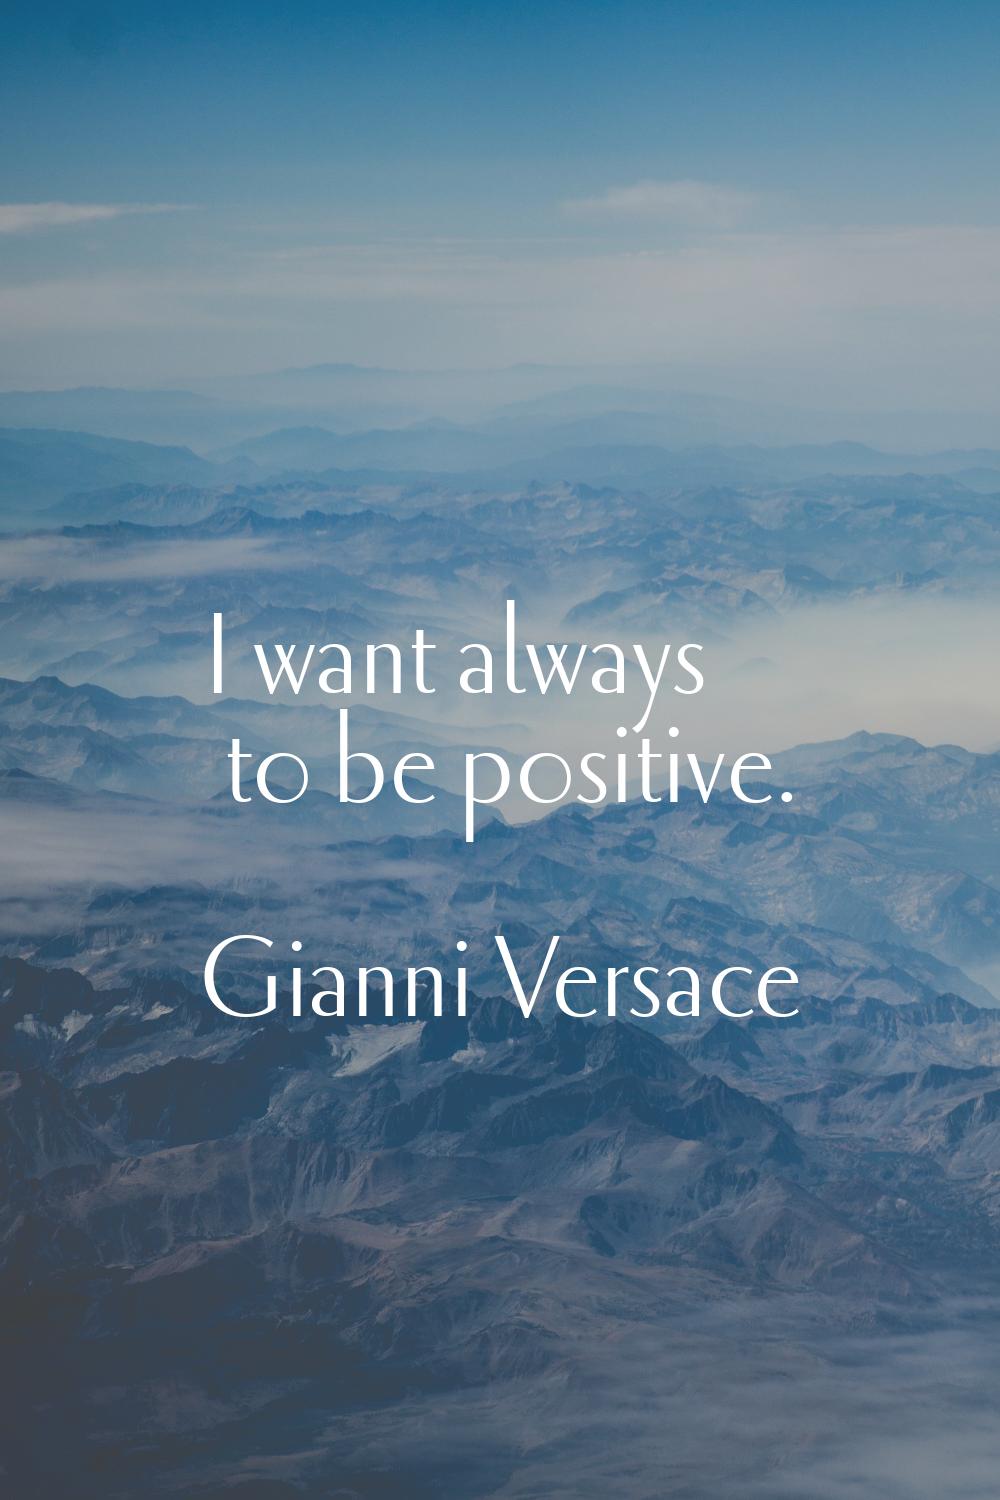 I want always to be positive.